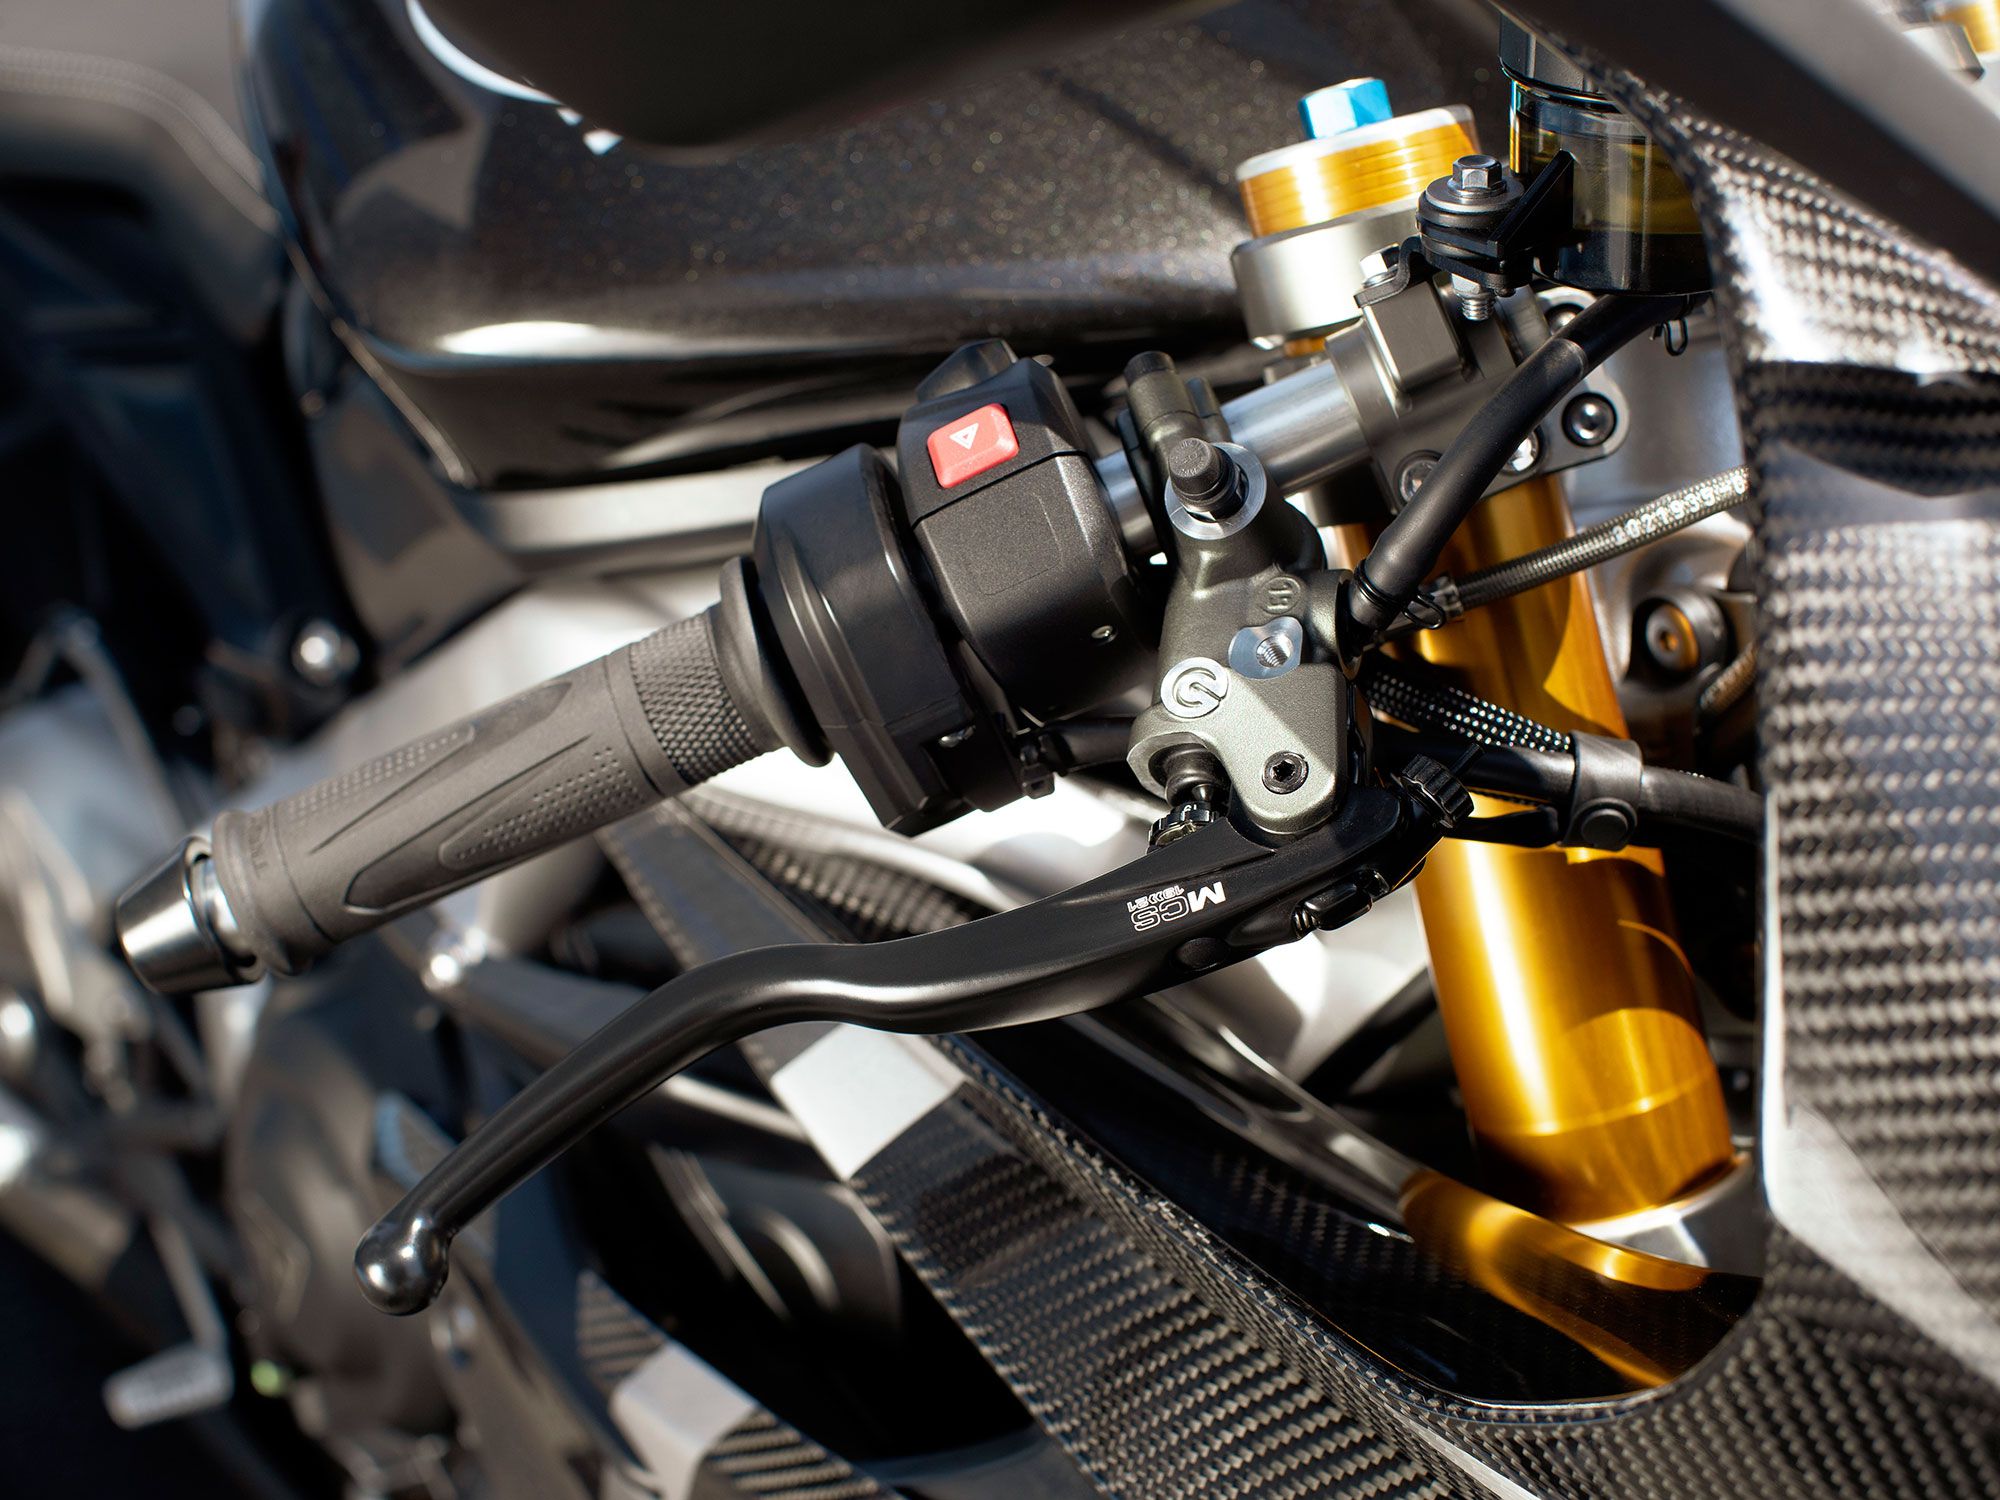 Brembo’s MCS-type master cylinder is a game changer. It allows the rider to modify brake feel and bite based on preference.